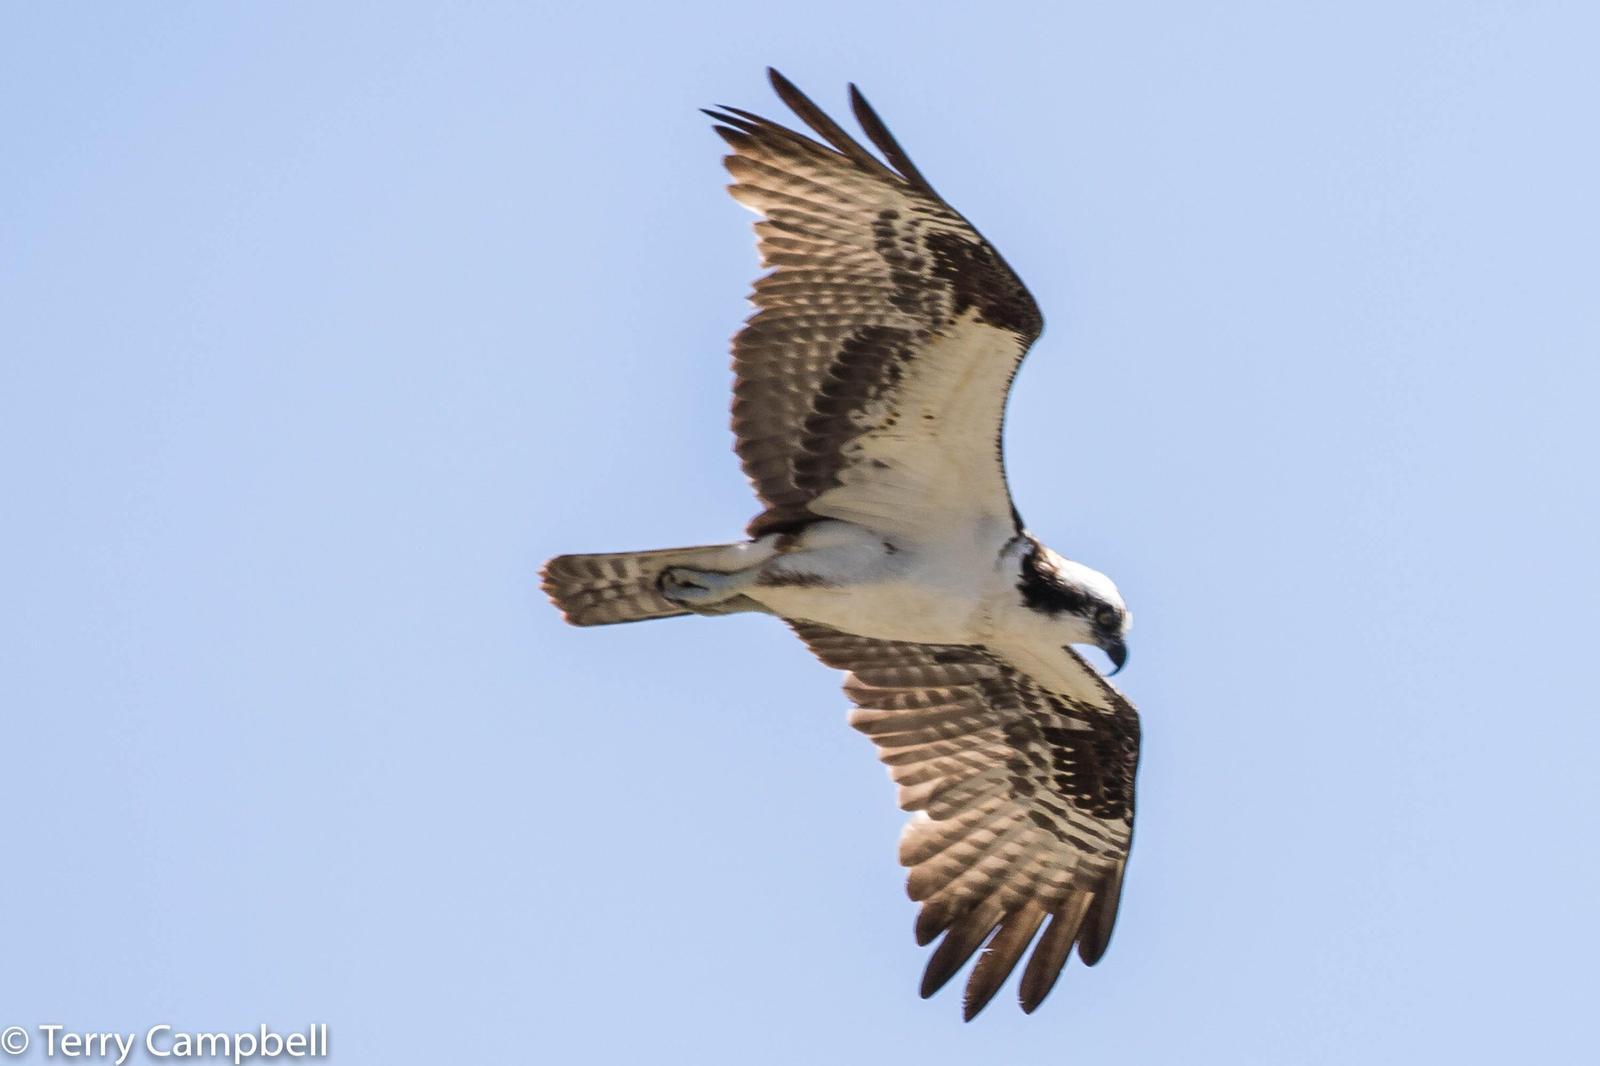 Osprey Photo by Terry Campbell